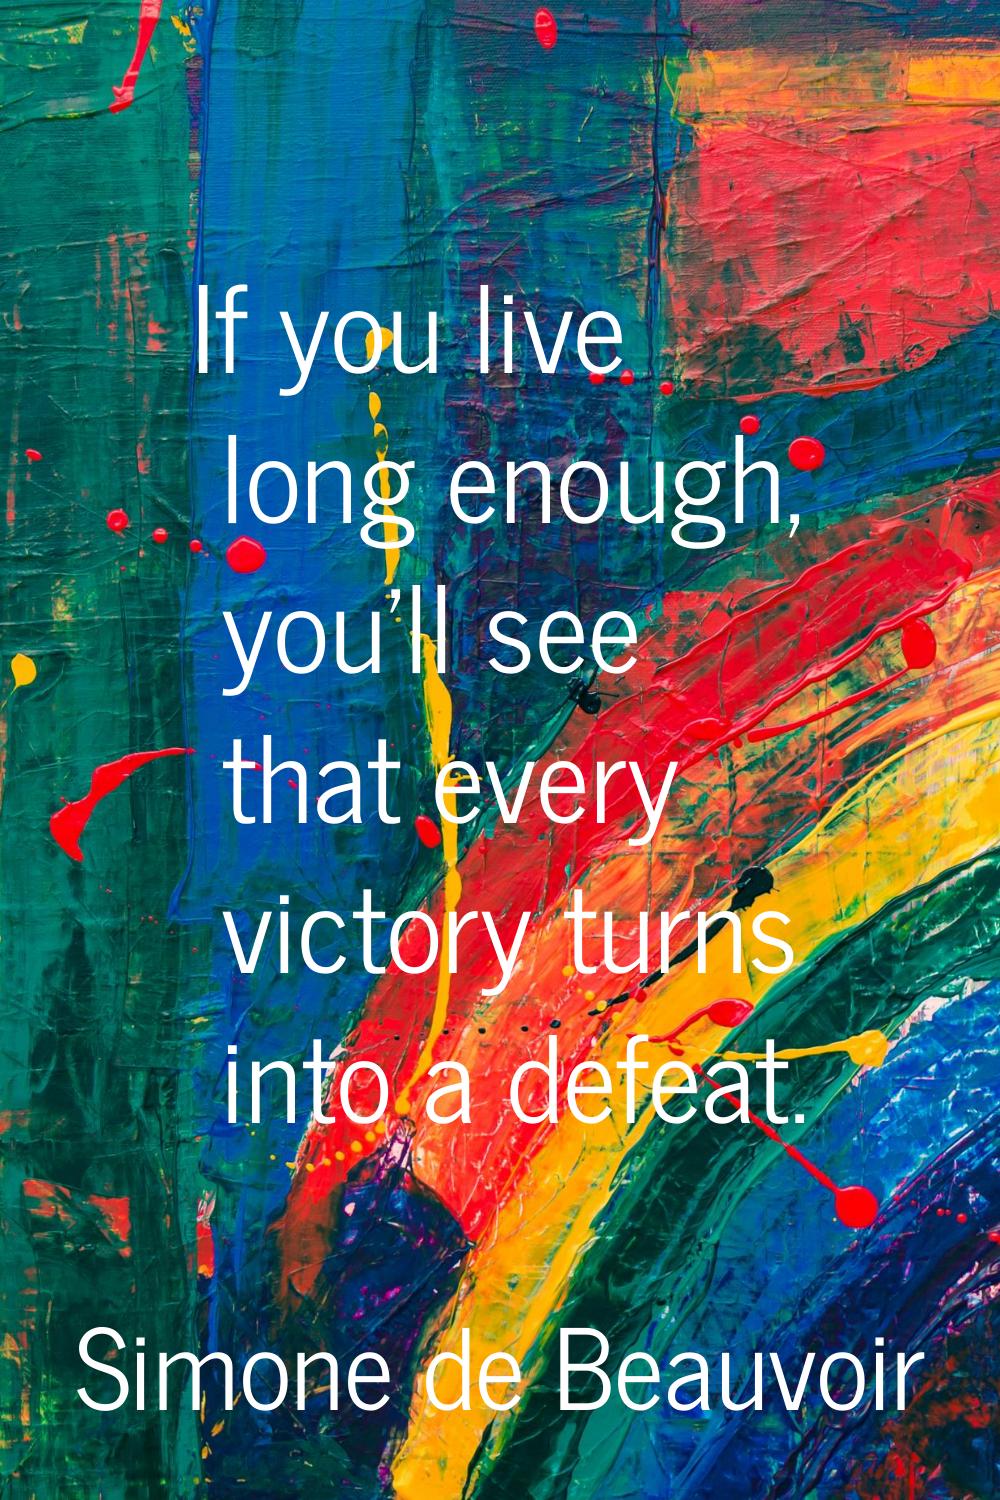 If you live long enough, you'll see that every victory turns into a defeat.